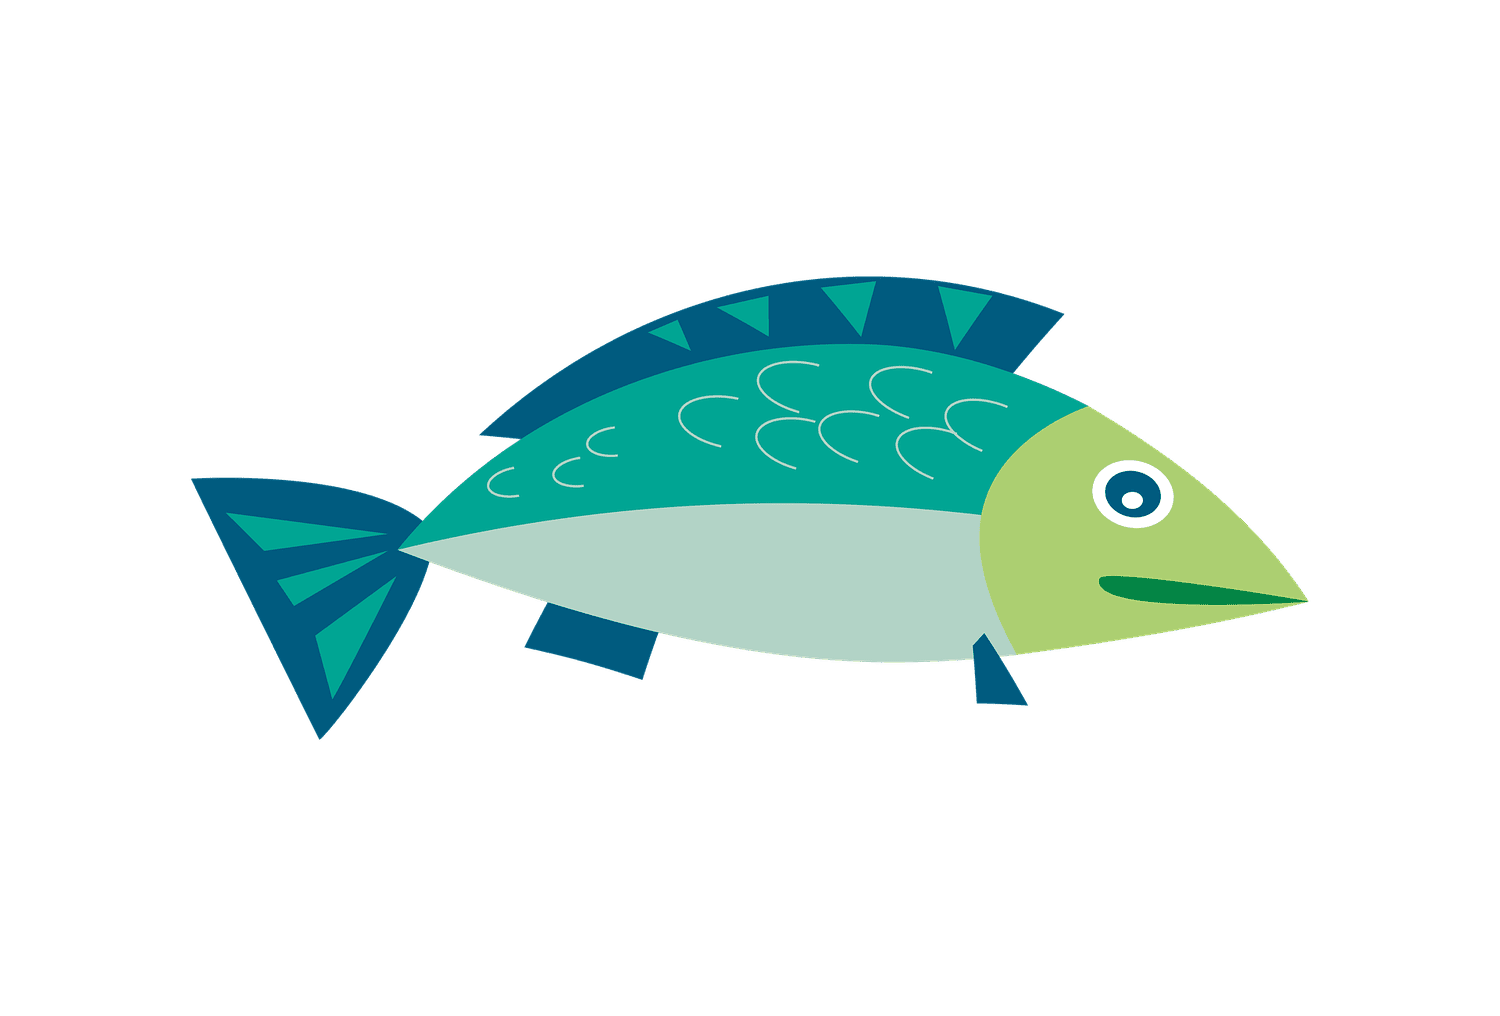 A blue and green illustrated fish